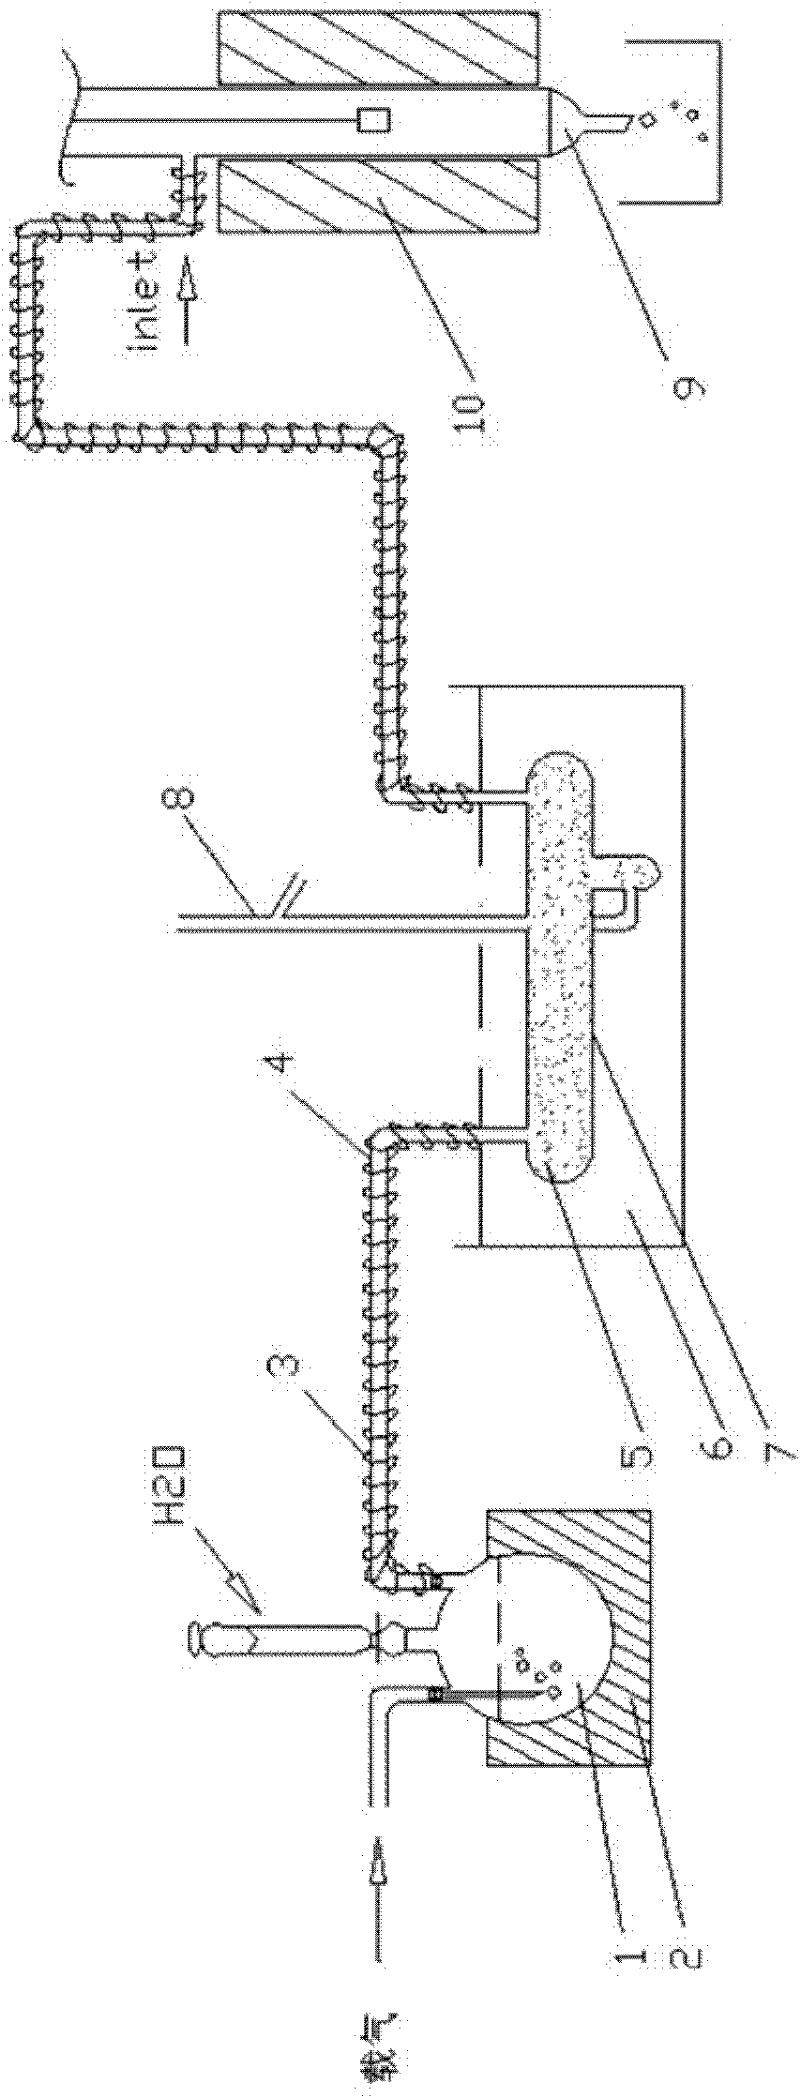 Device for generating saturated steam with controllable steam pressure